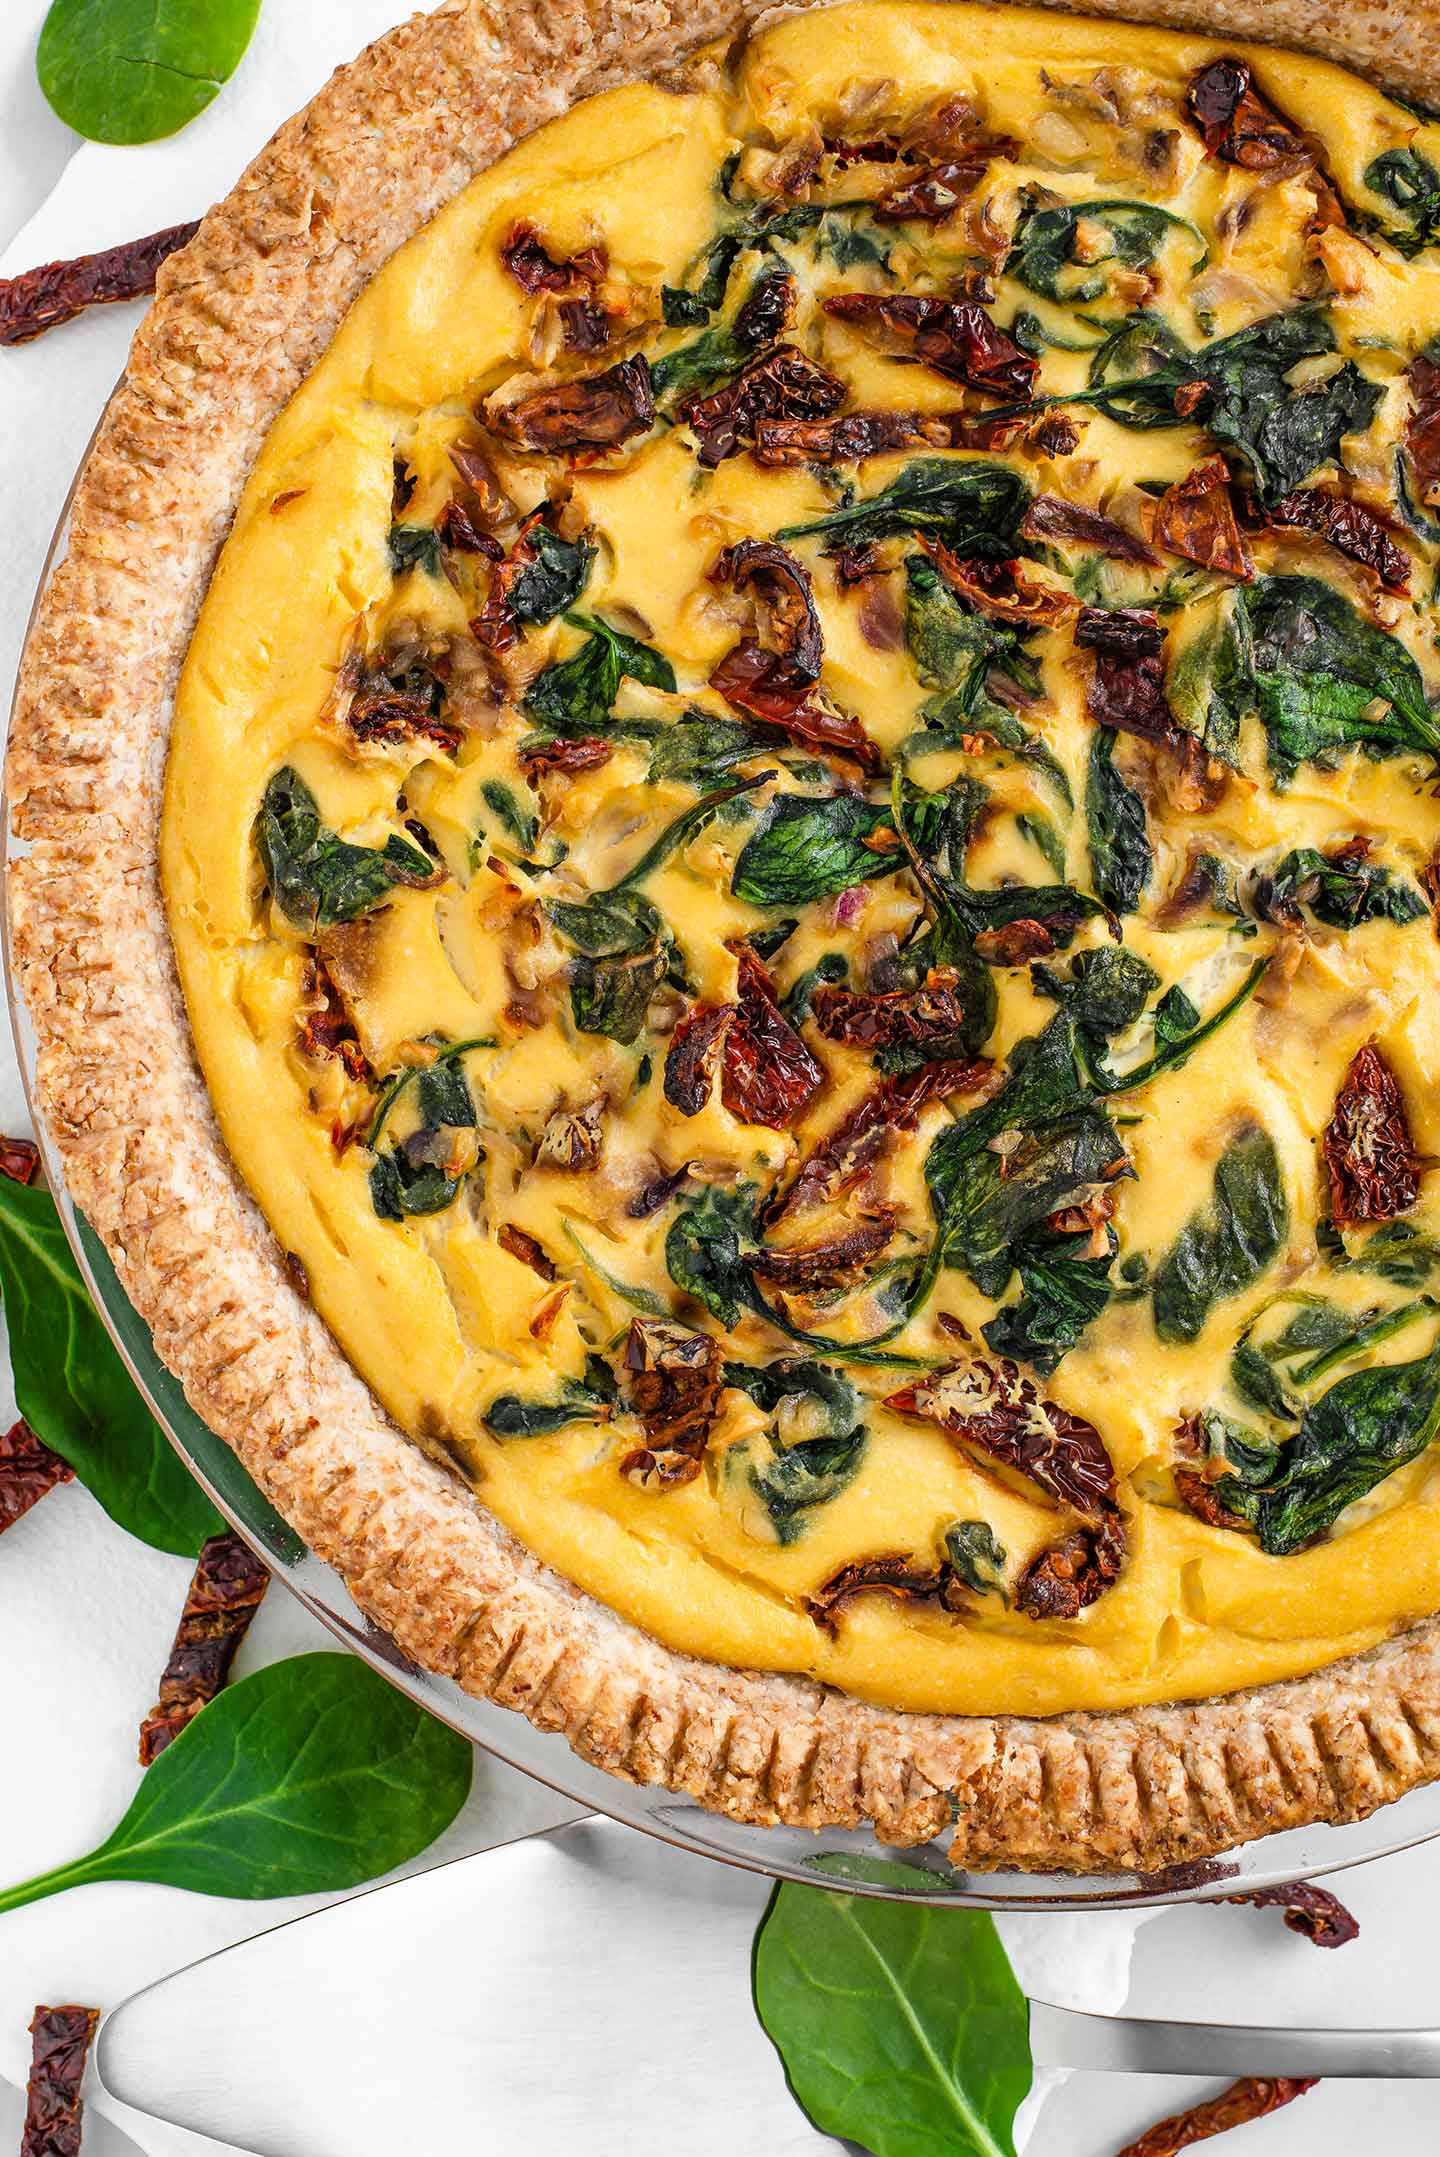 Top down view of a golden breakfast pie with sun-dried tomatoes and spinach. The edges of the whole wheat crust are crimped with a fork, browned, and crispy.